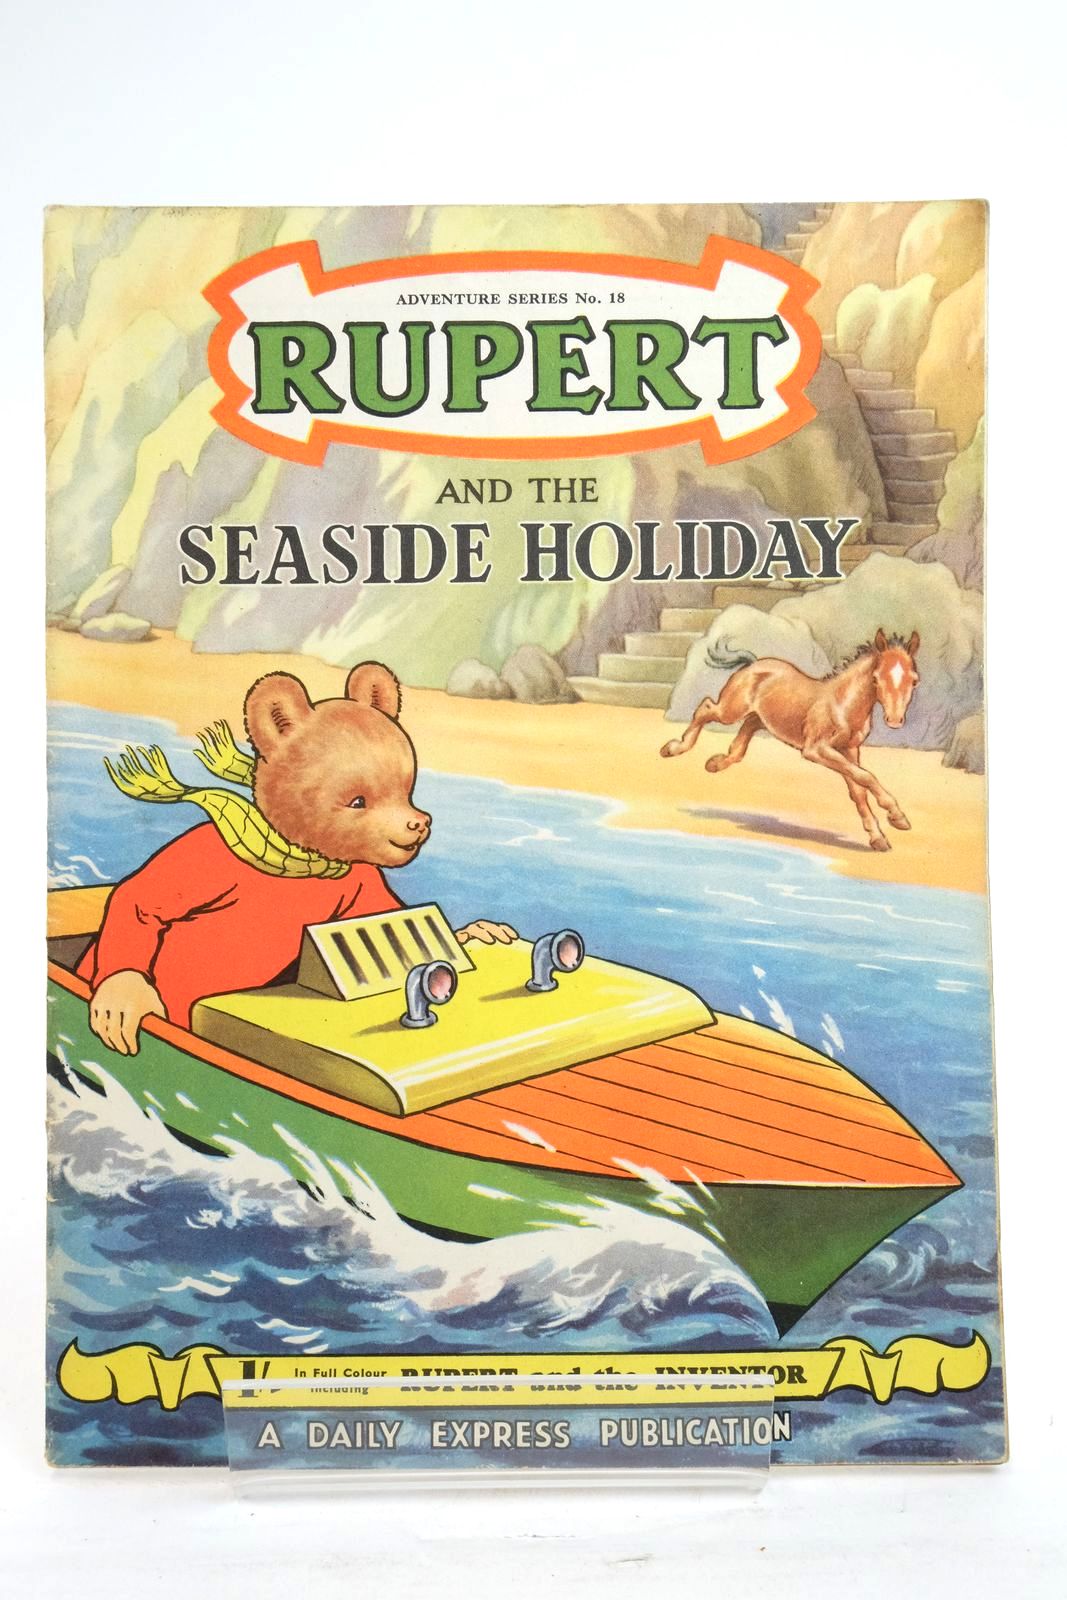 Photo of RUPERT ADVENTURE SERIES No. 18 - RUPERT AND THE SEASIDE HOLIDAY written by Bestall, Alfred illustrated by Bestall, Alfred published by Daily Express (STOCK CODE: 2136973)  for sale by Stella & Rose's Books